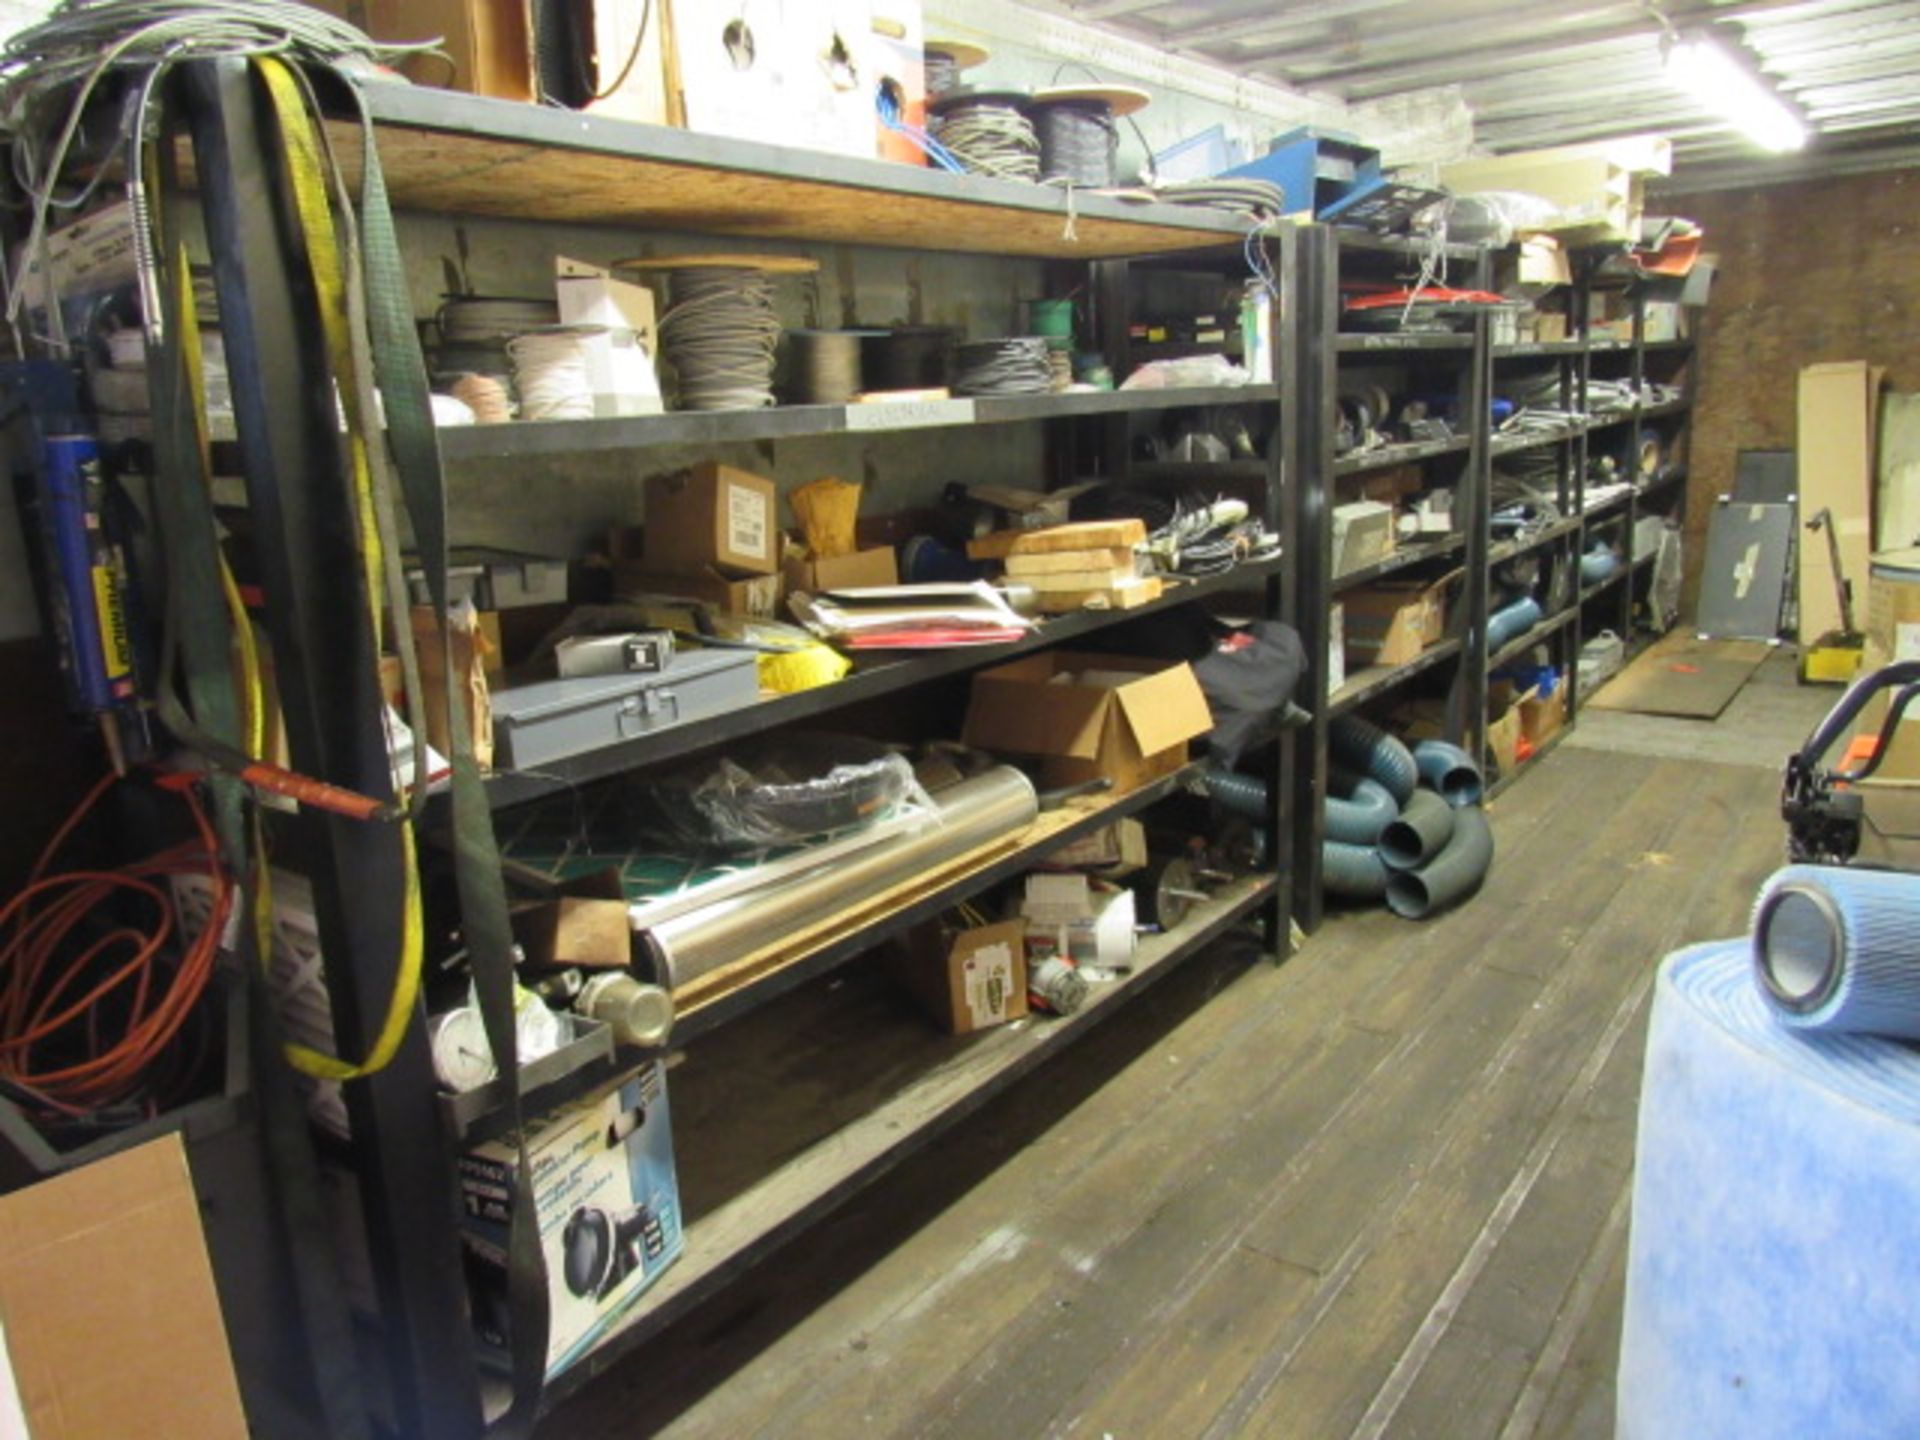 Contents of Maintenance Shed including Steel Racks, Electric, Building Supplies, Clamps, Wire - Image 2 of 2